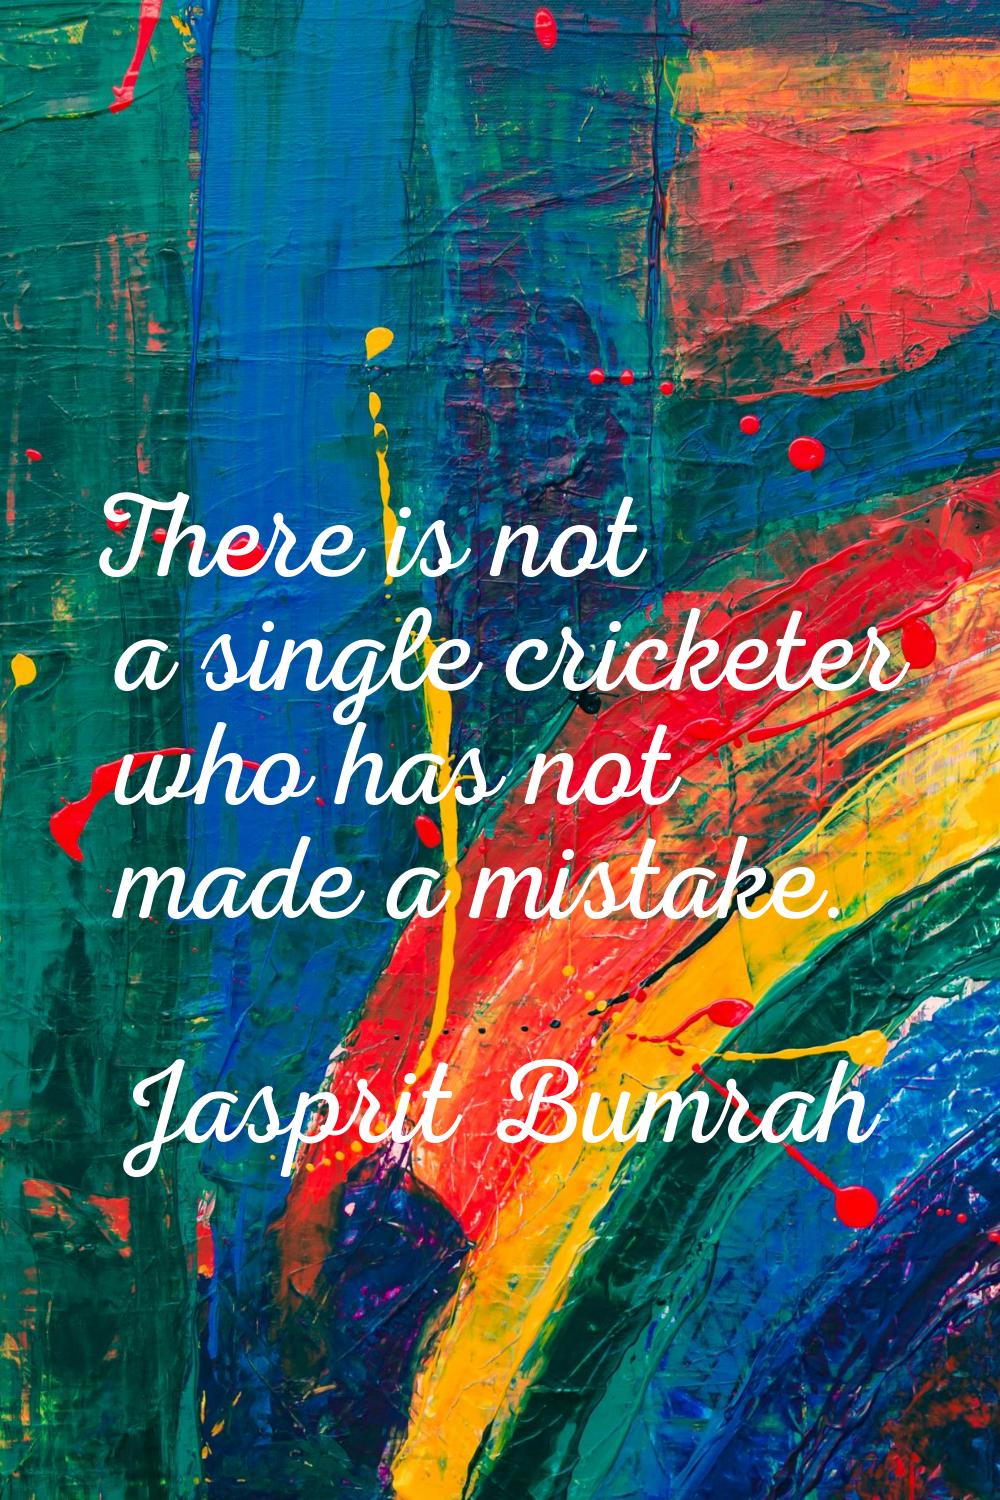 There is not a single cricketer who has not made a mistake.